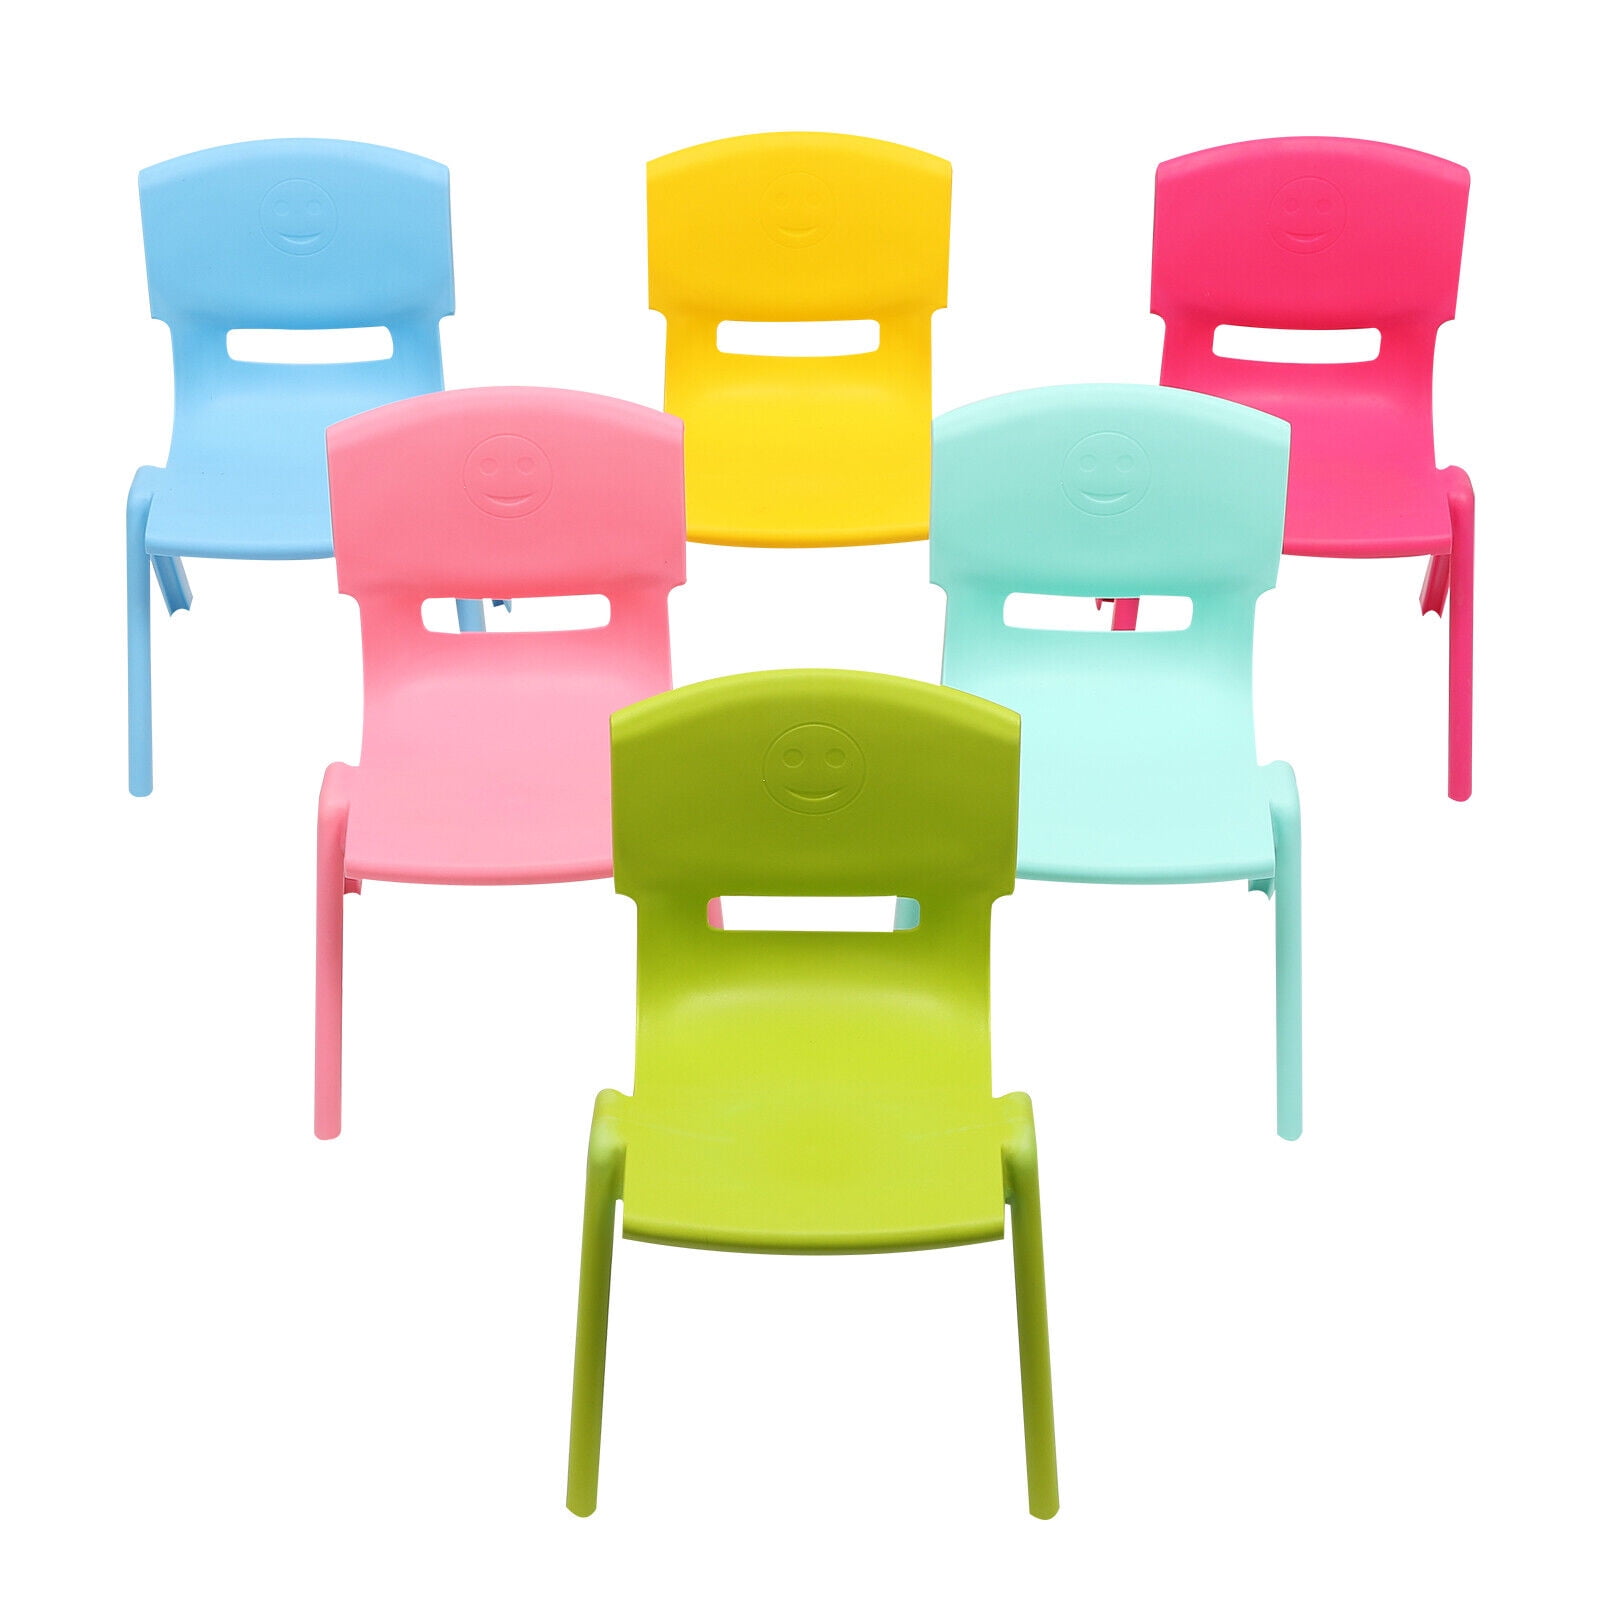 Oukaning 6PCS Colorful School Stackable School Chairs, with